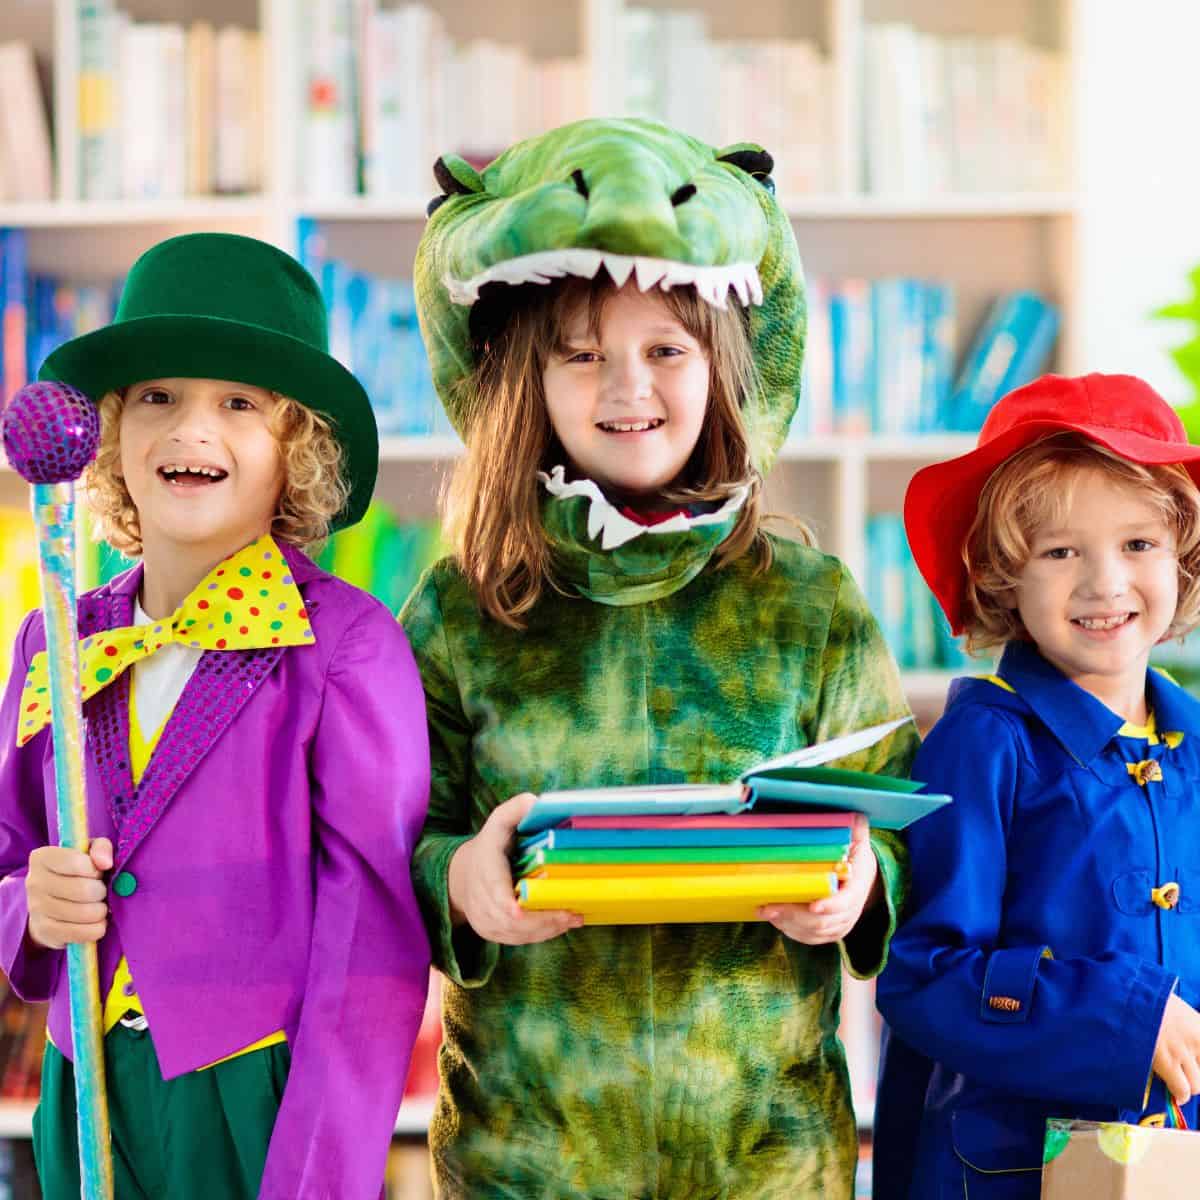 kids dressed as book characters holding books.